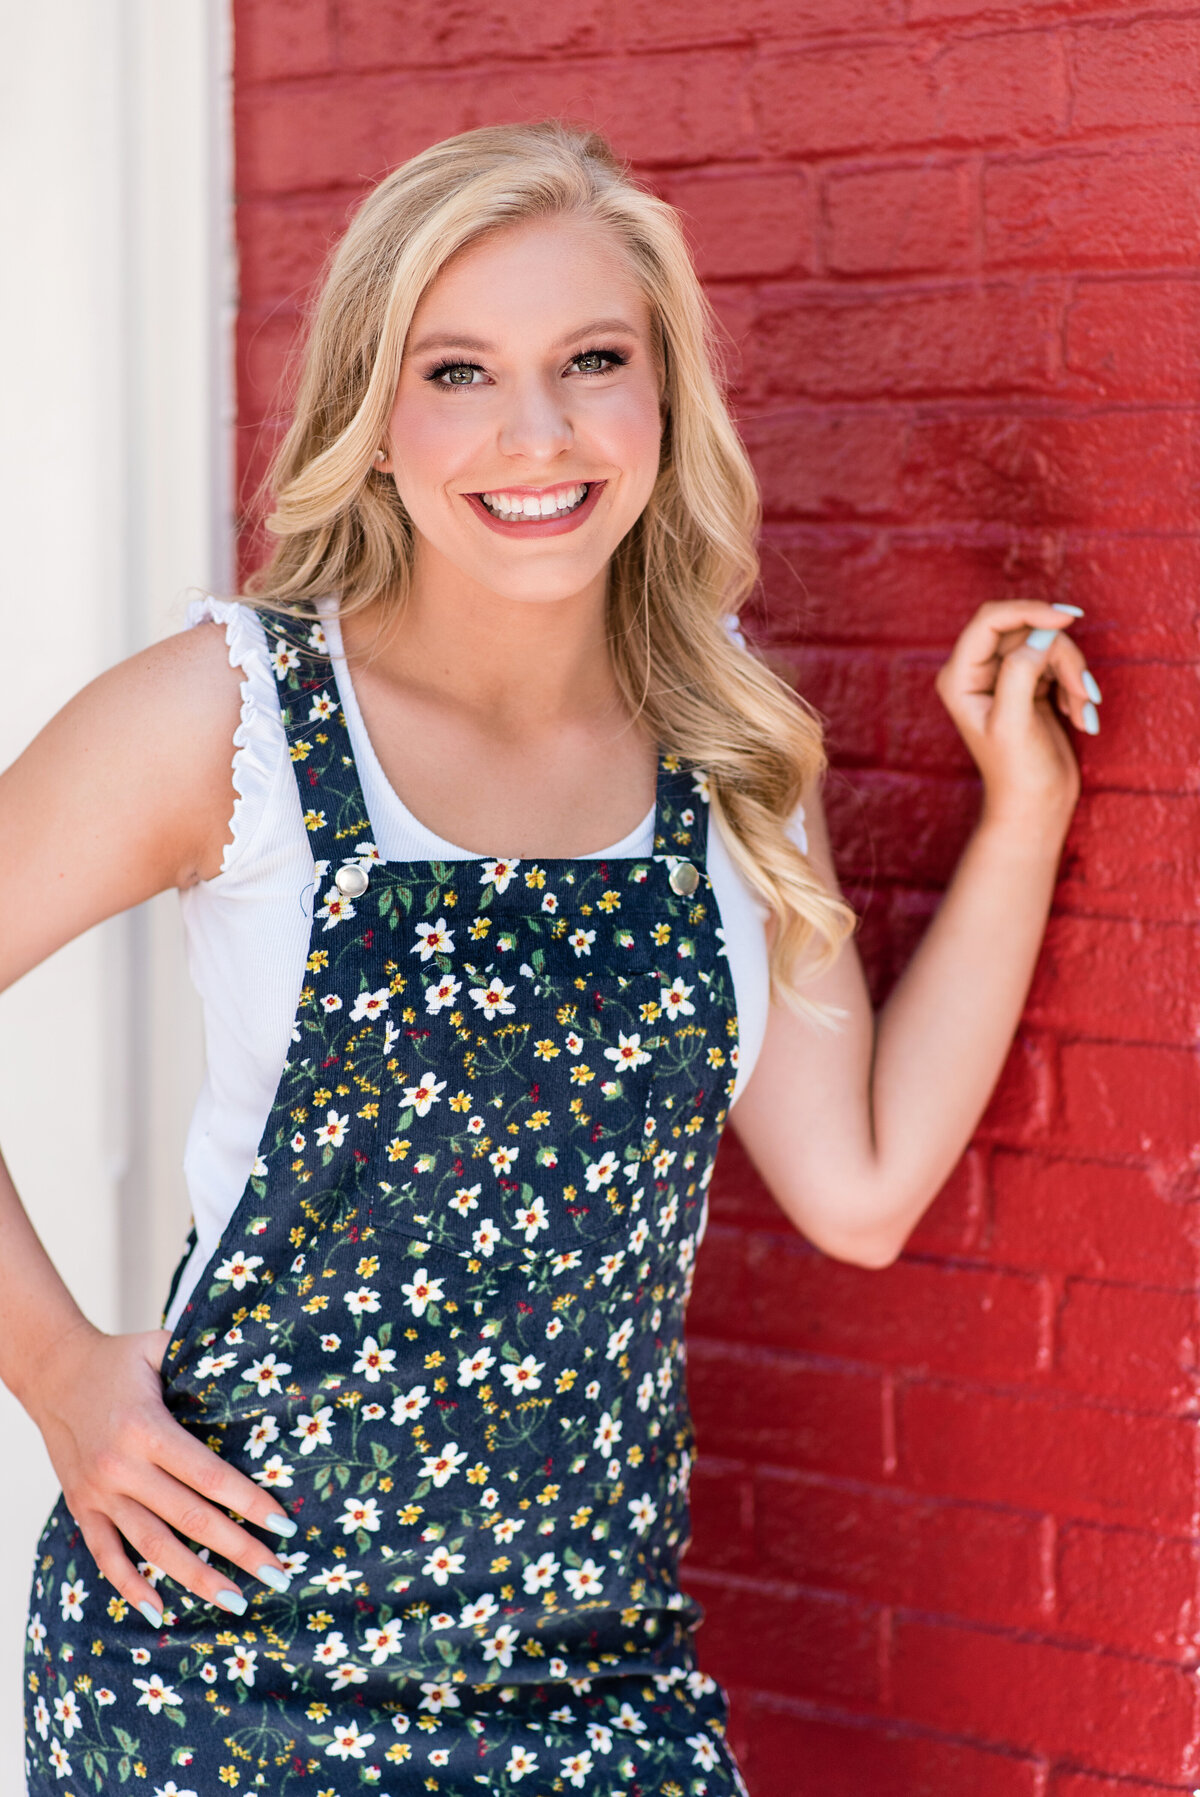 Richmond senior girl poses in front of red brick wall during senior portrait session.